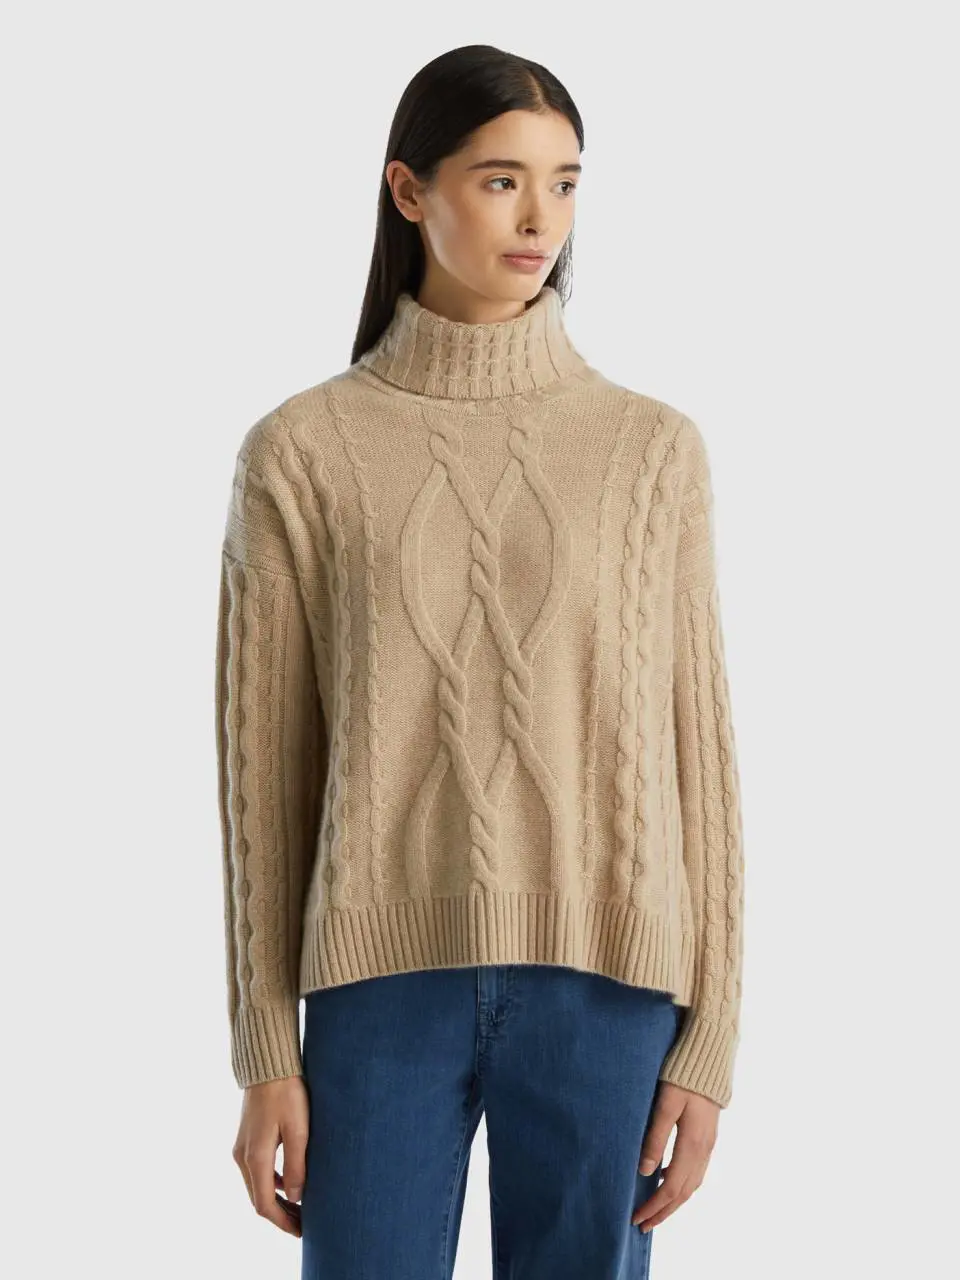 Benetton pure cashmere turtleneck with cable knit. 1